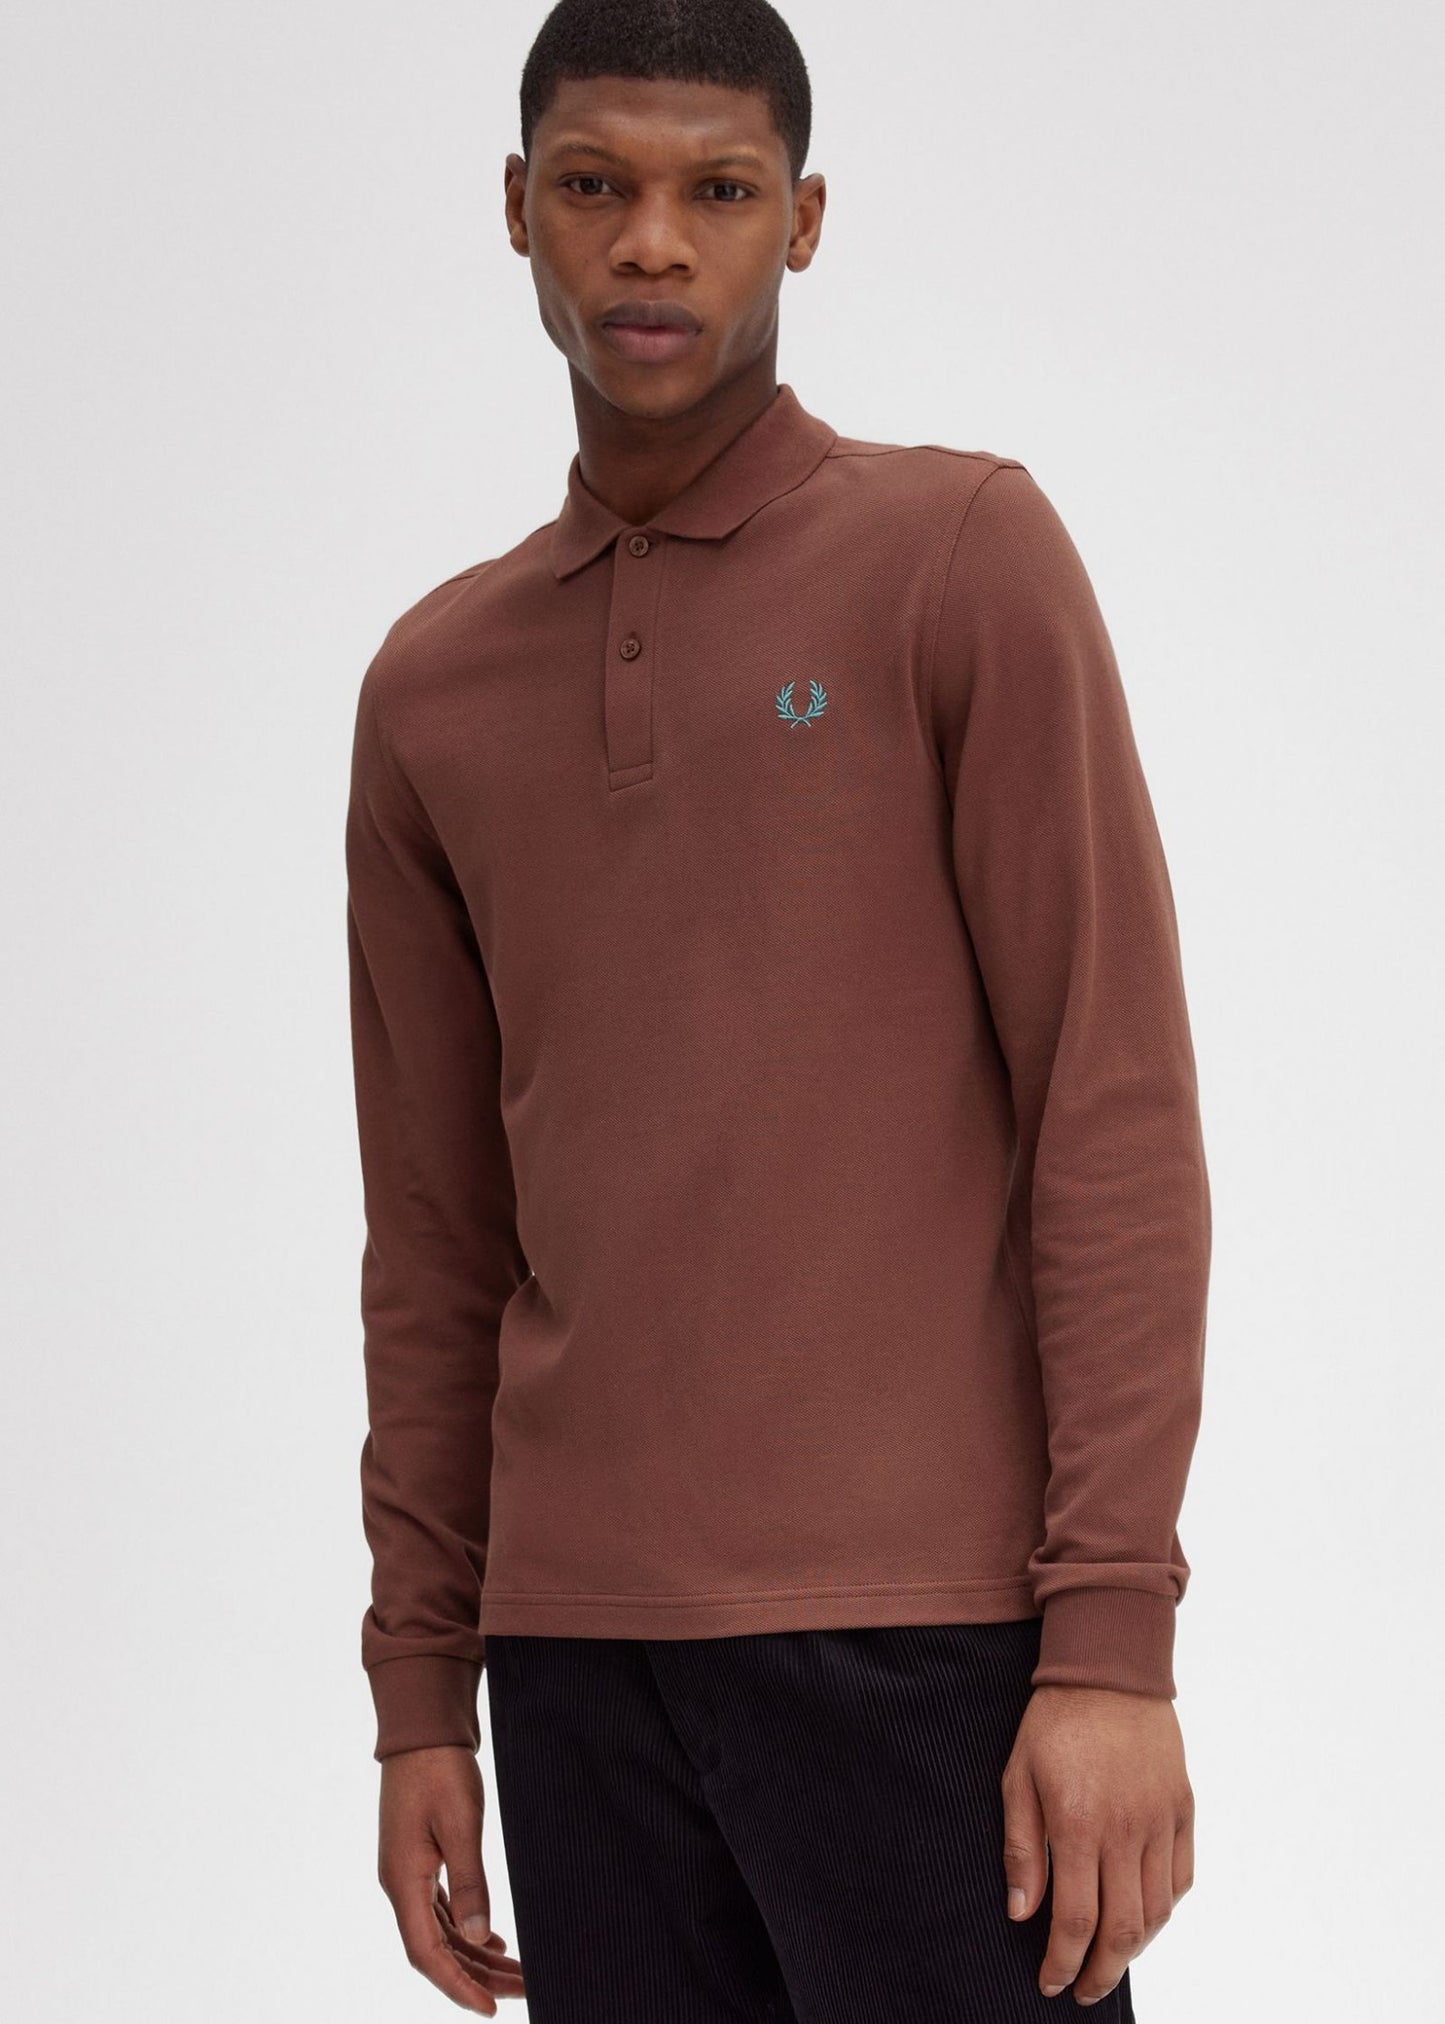 Fred Perry Longsleeve Polo's  LS plain fred perry shirt - whisky brown 